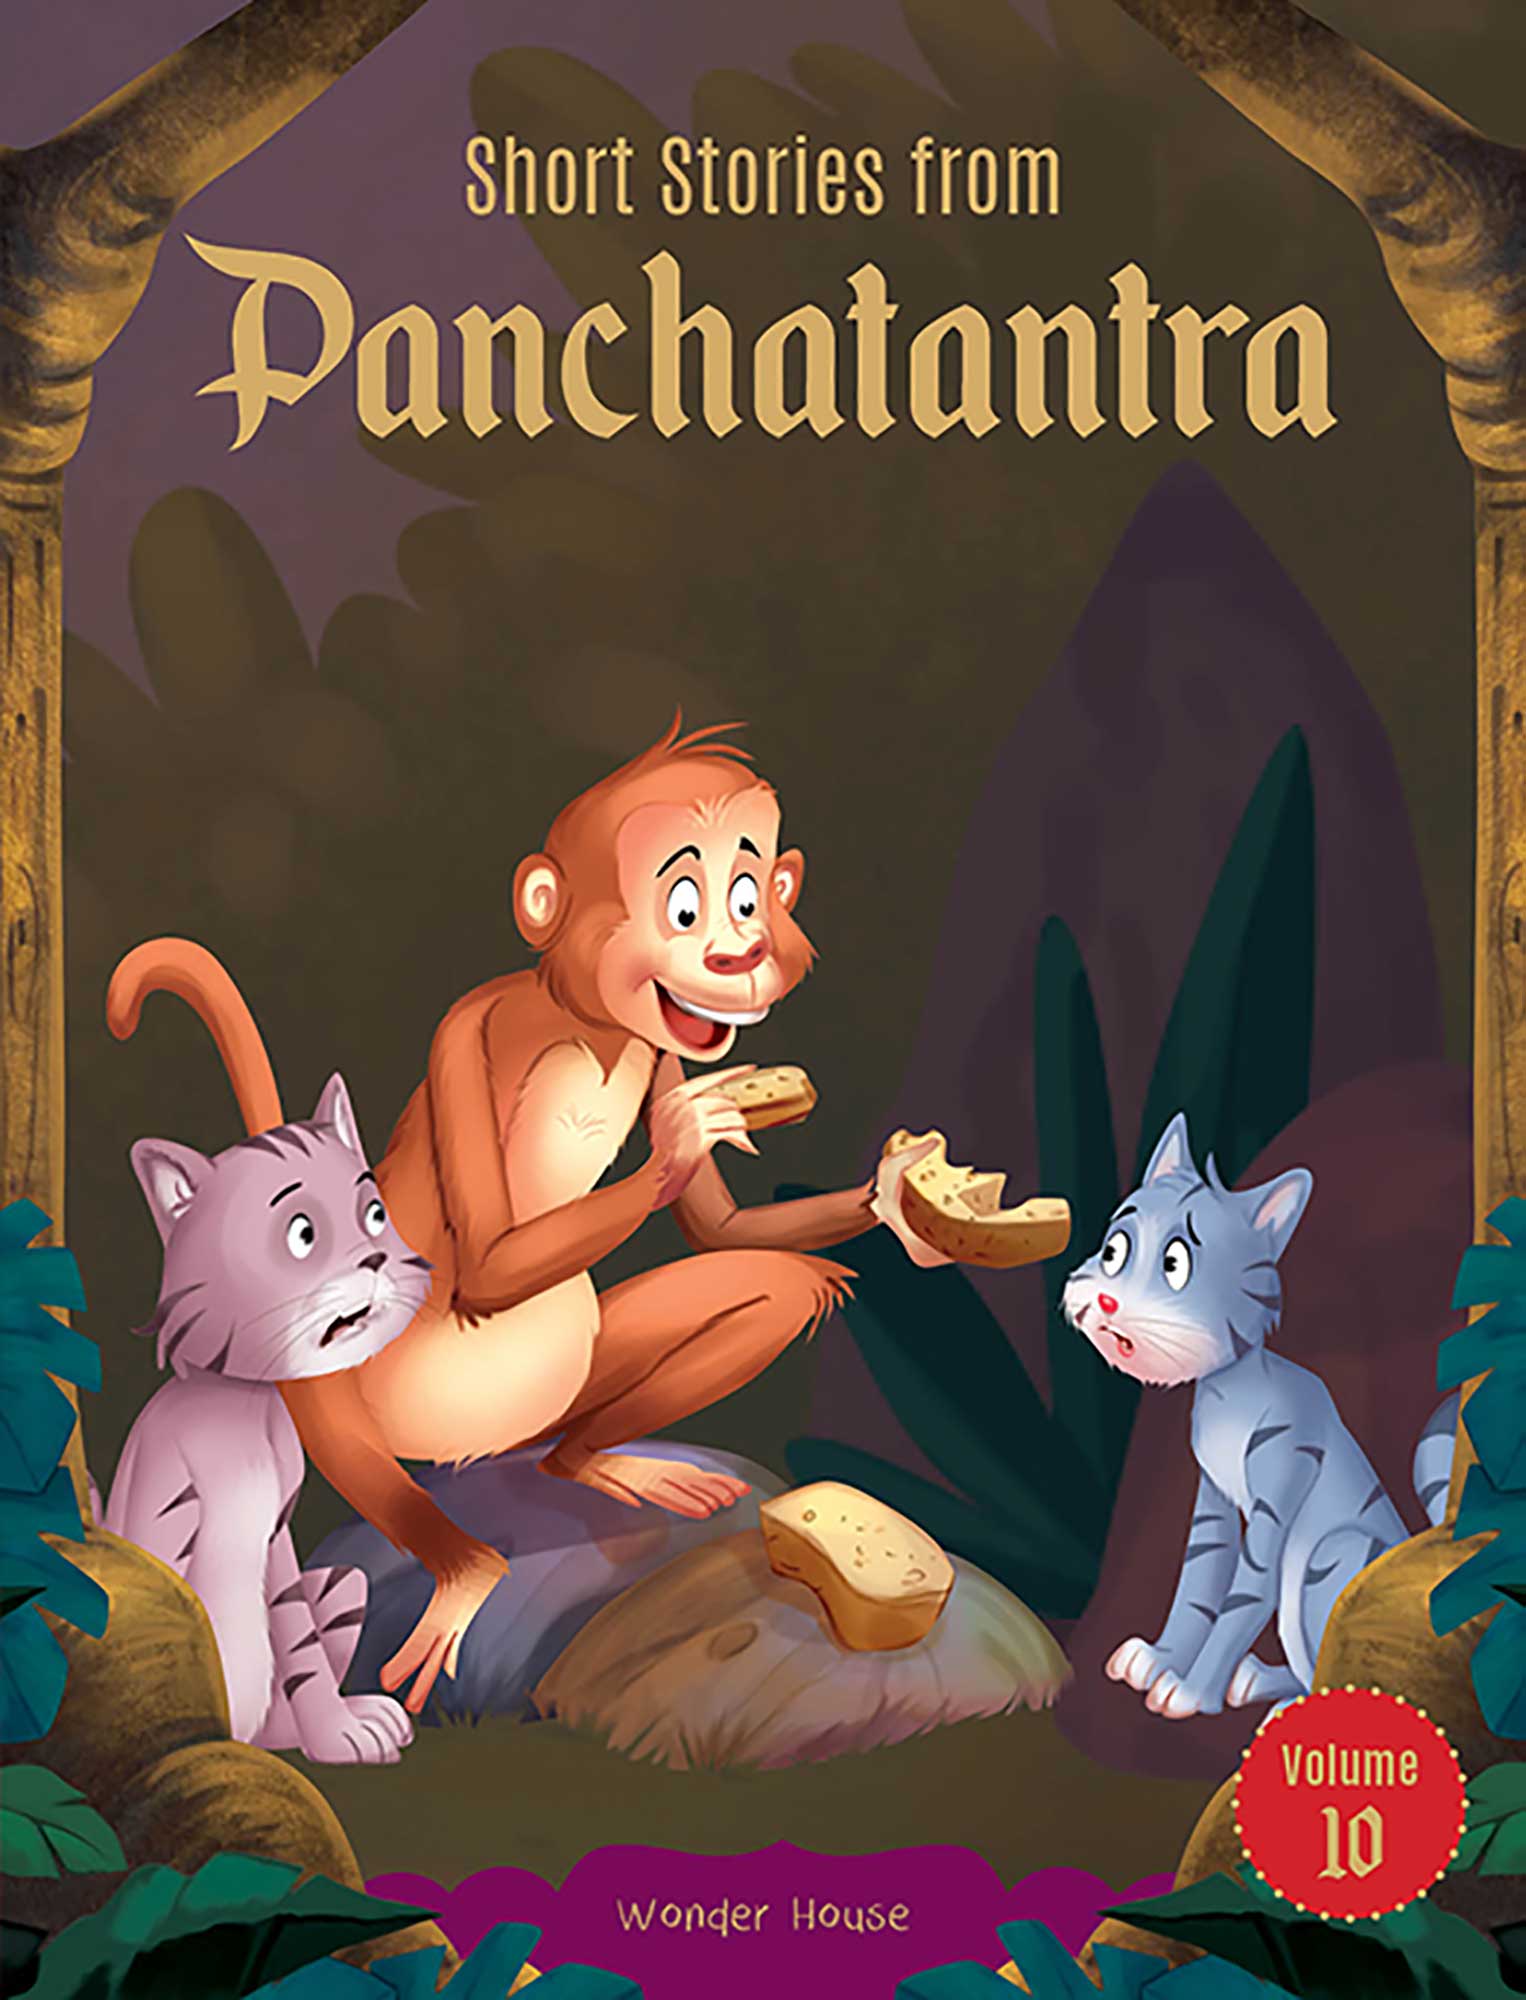 Short Stories From Panchatantra - Volume 10: Abridged Illustrated Stories For Children (With Morals)